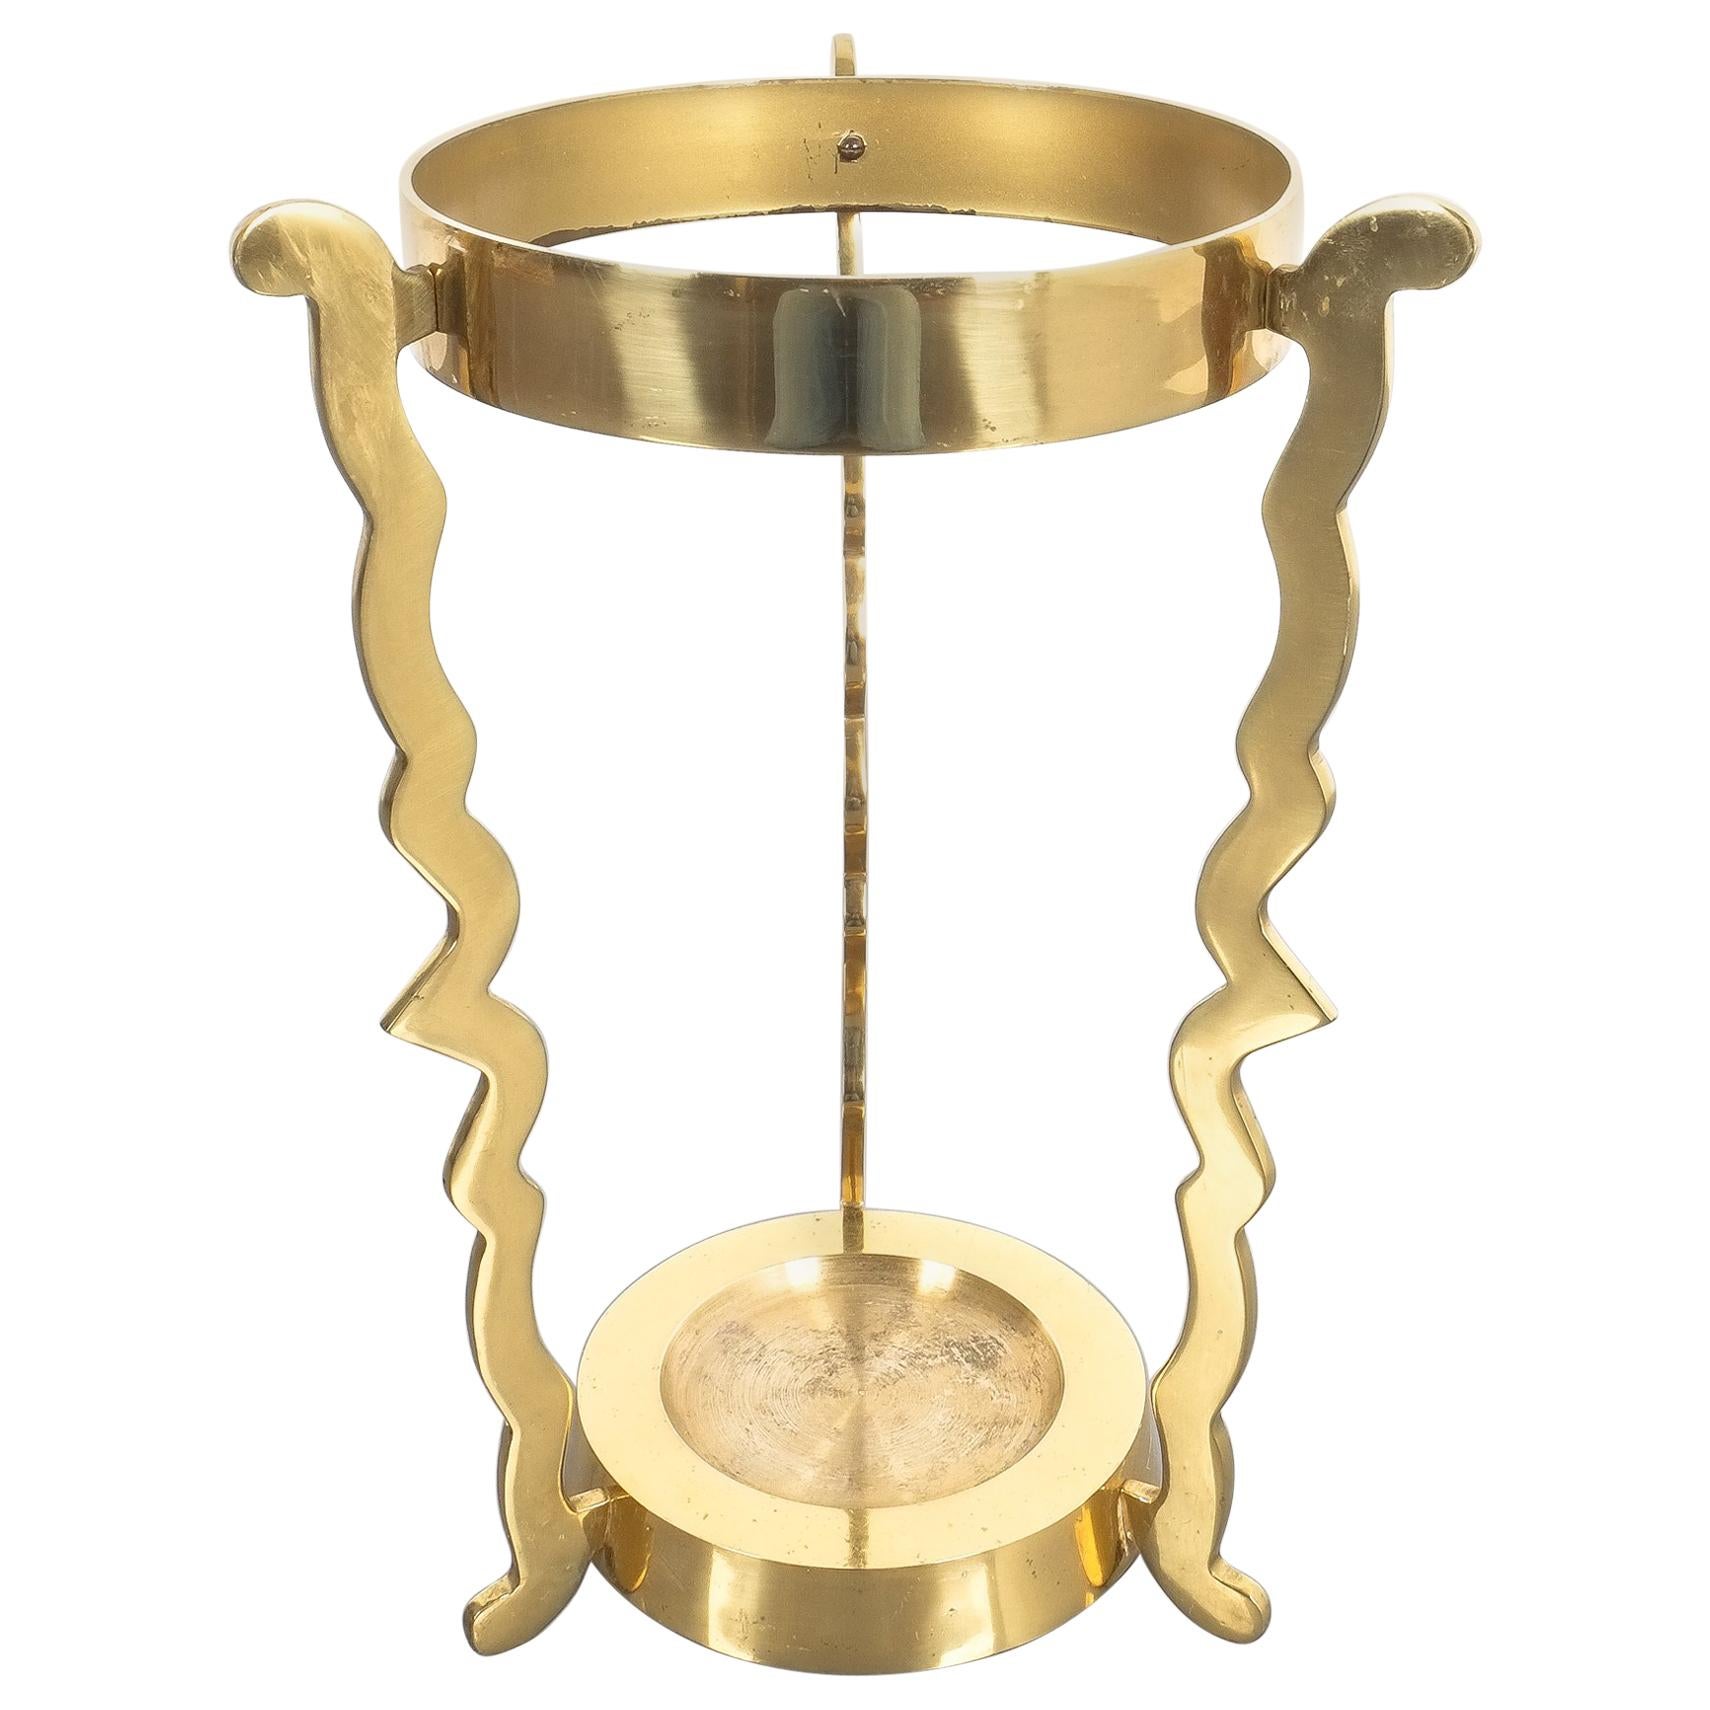 Midcentury Umbrella Stand From Solid Brass For Sale